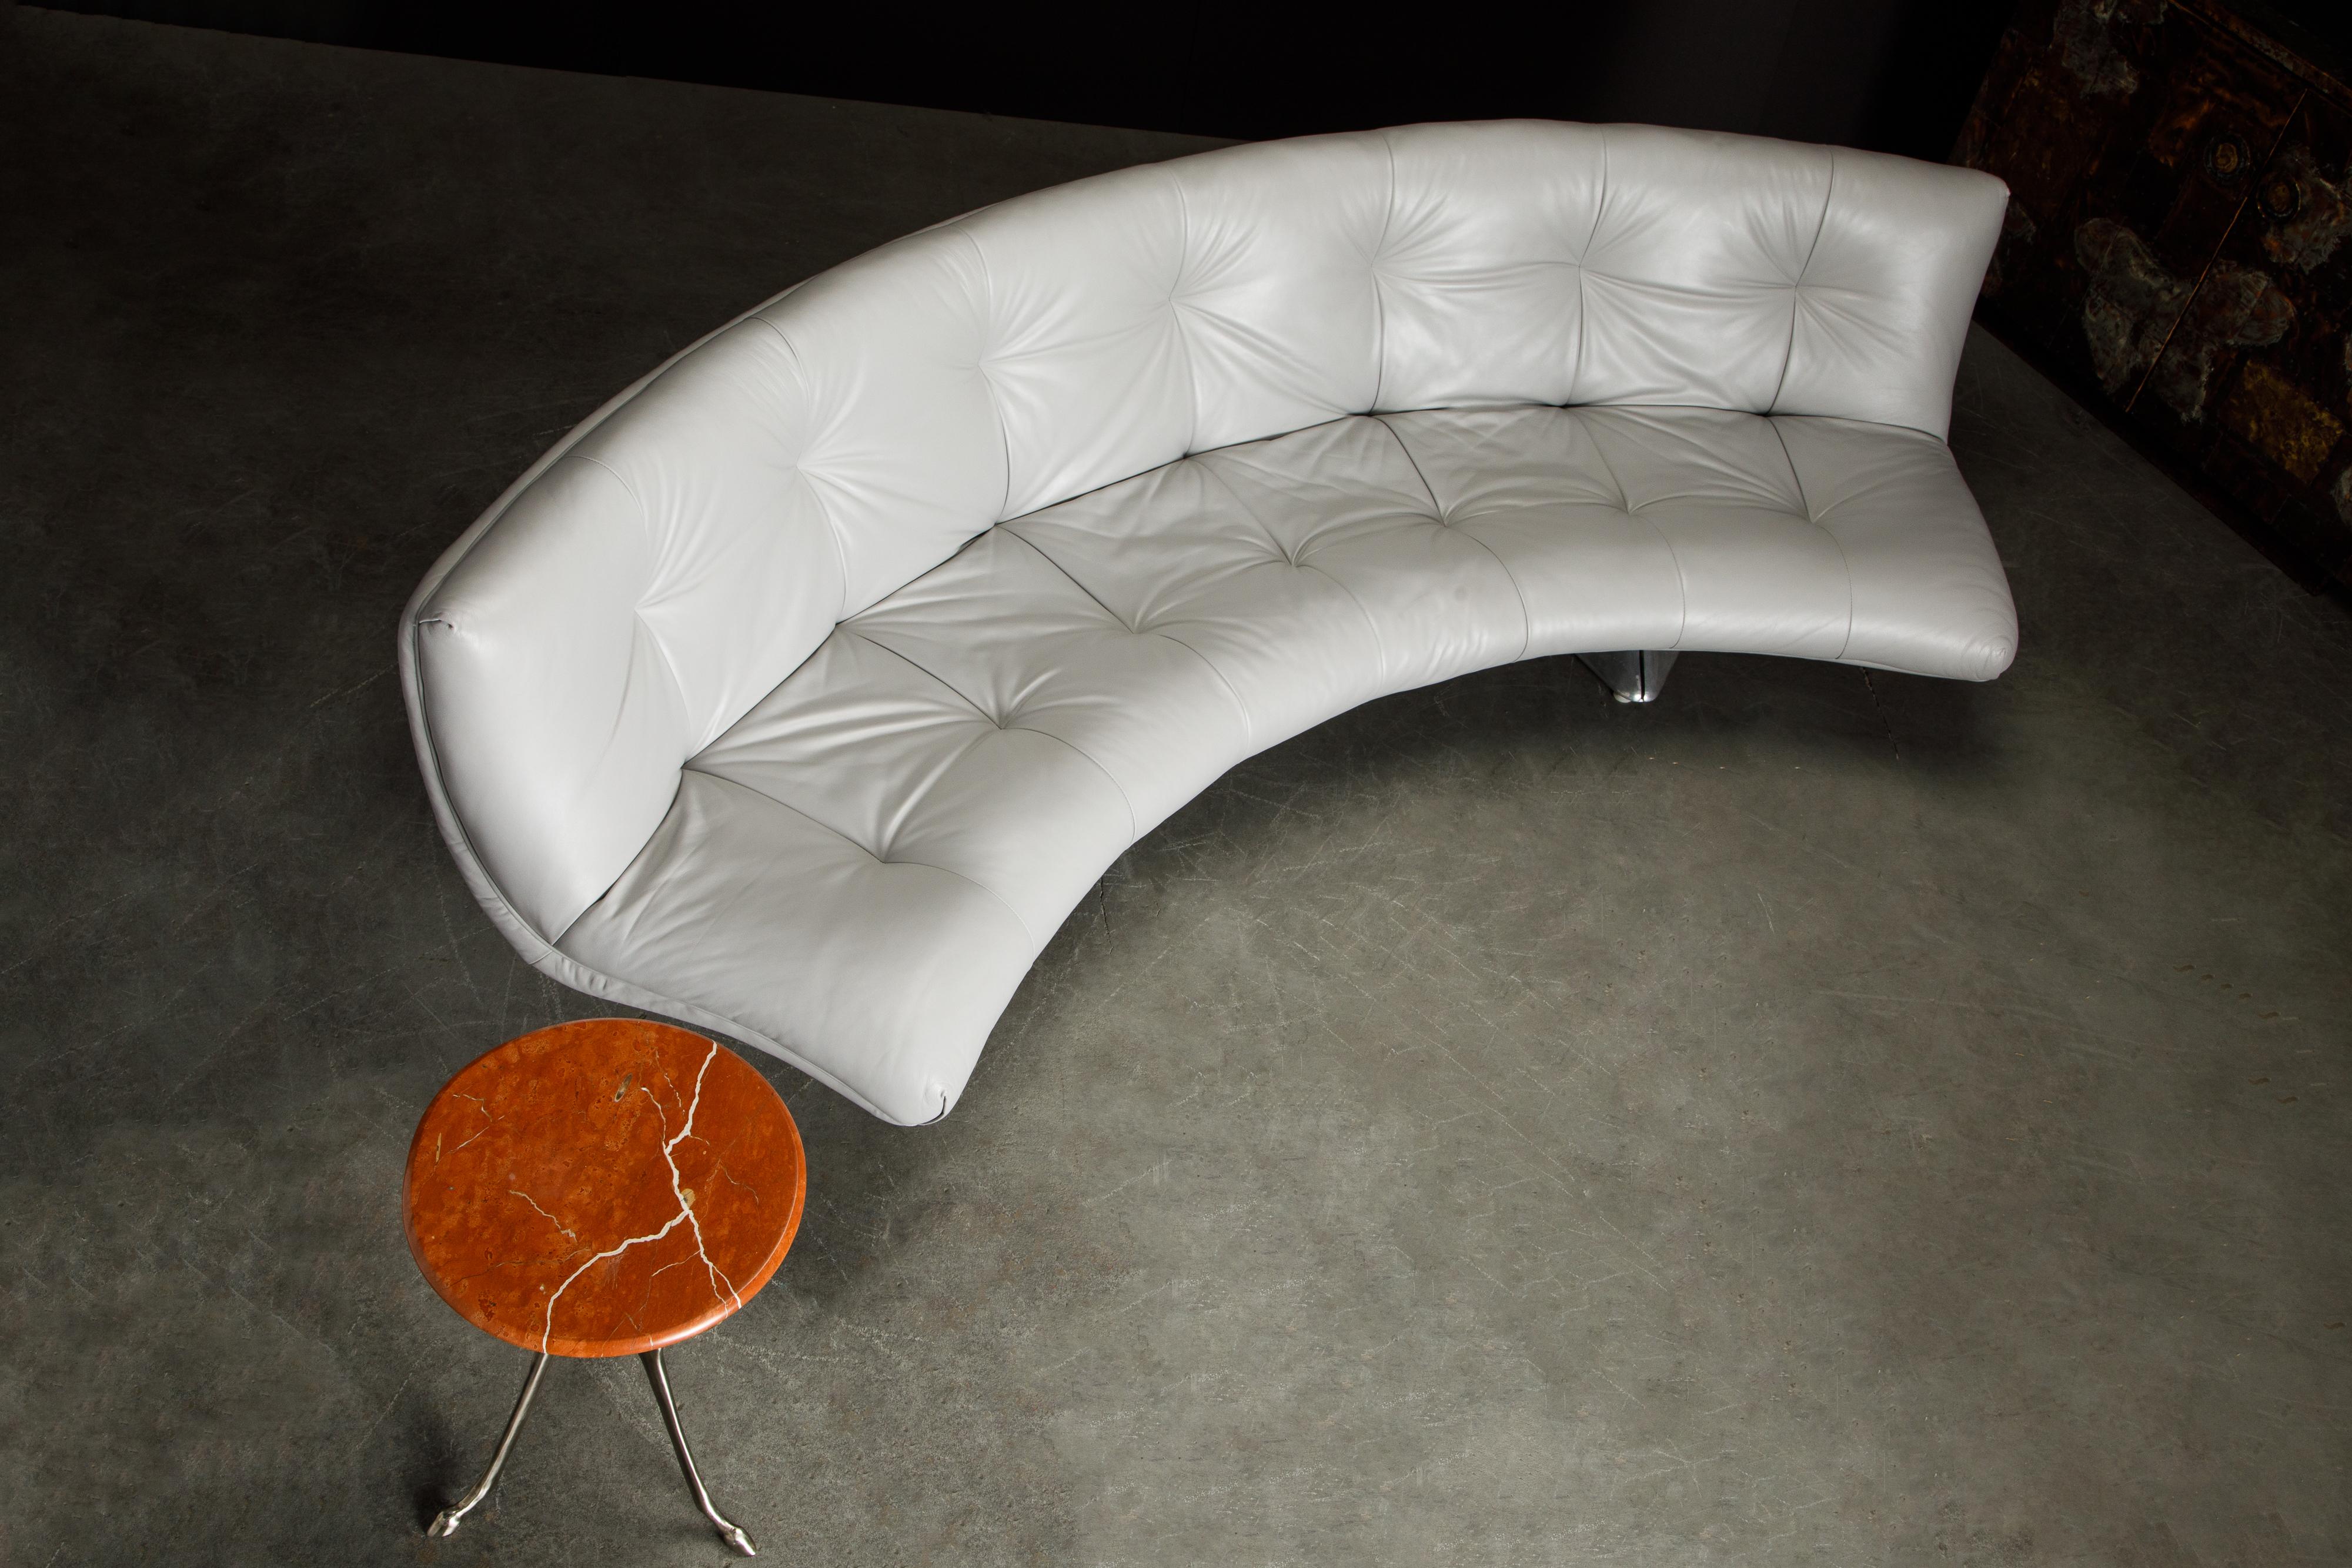 Rare 'Unicorn' Leather and Aluminum Curved Sofa by Vladimir Kagan, c. 1963 For Sale 6